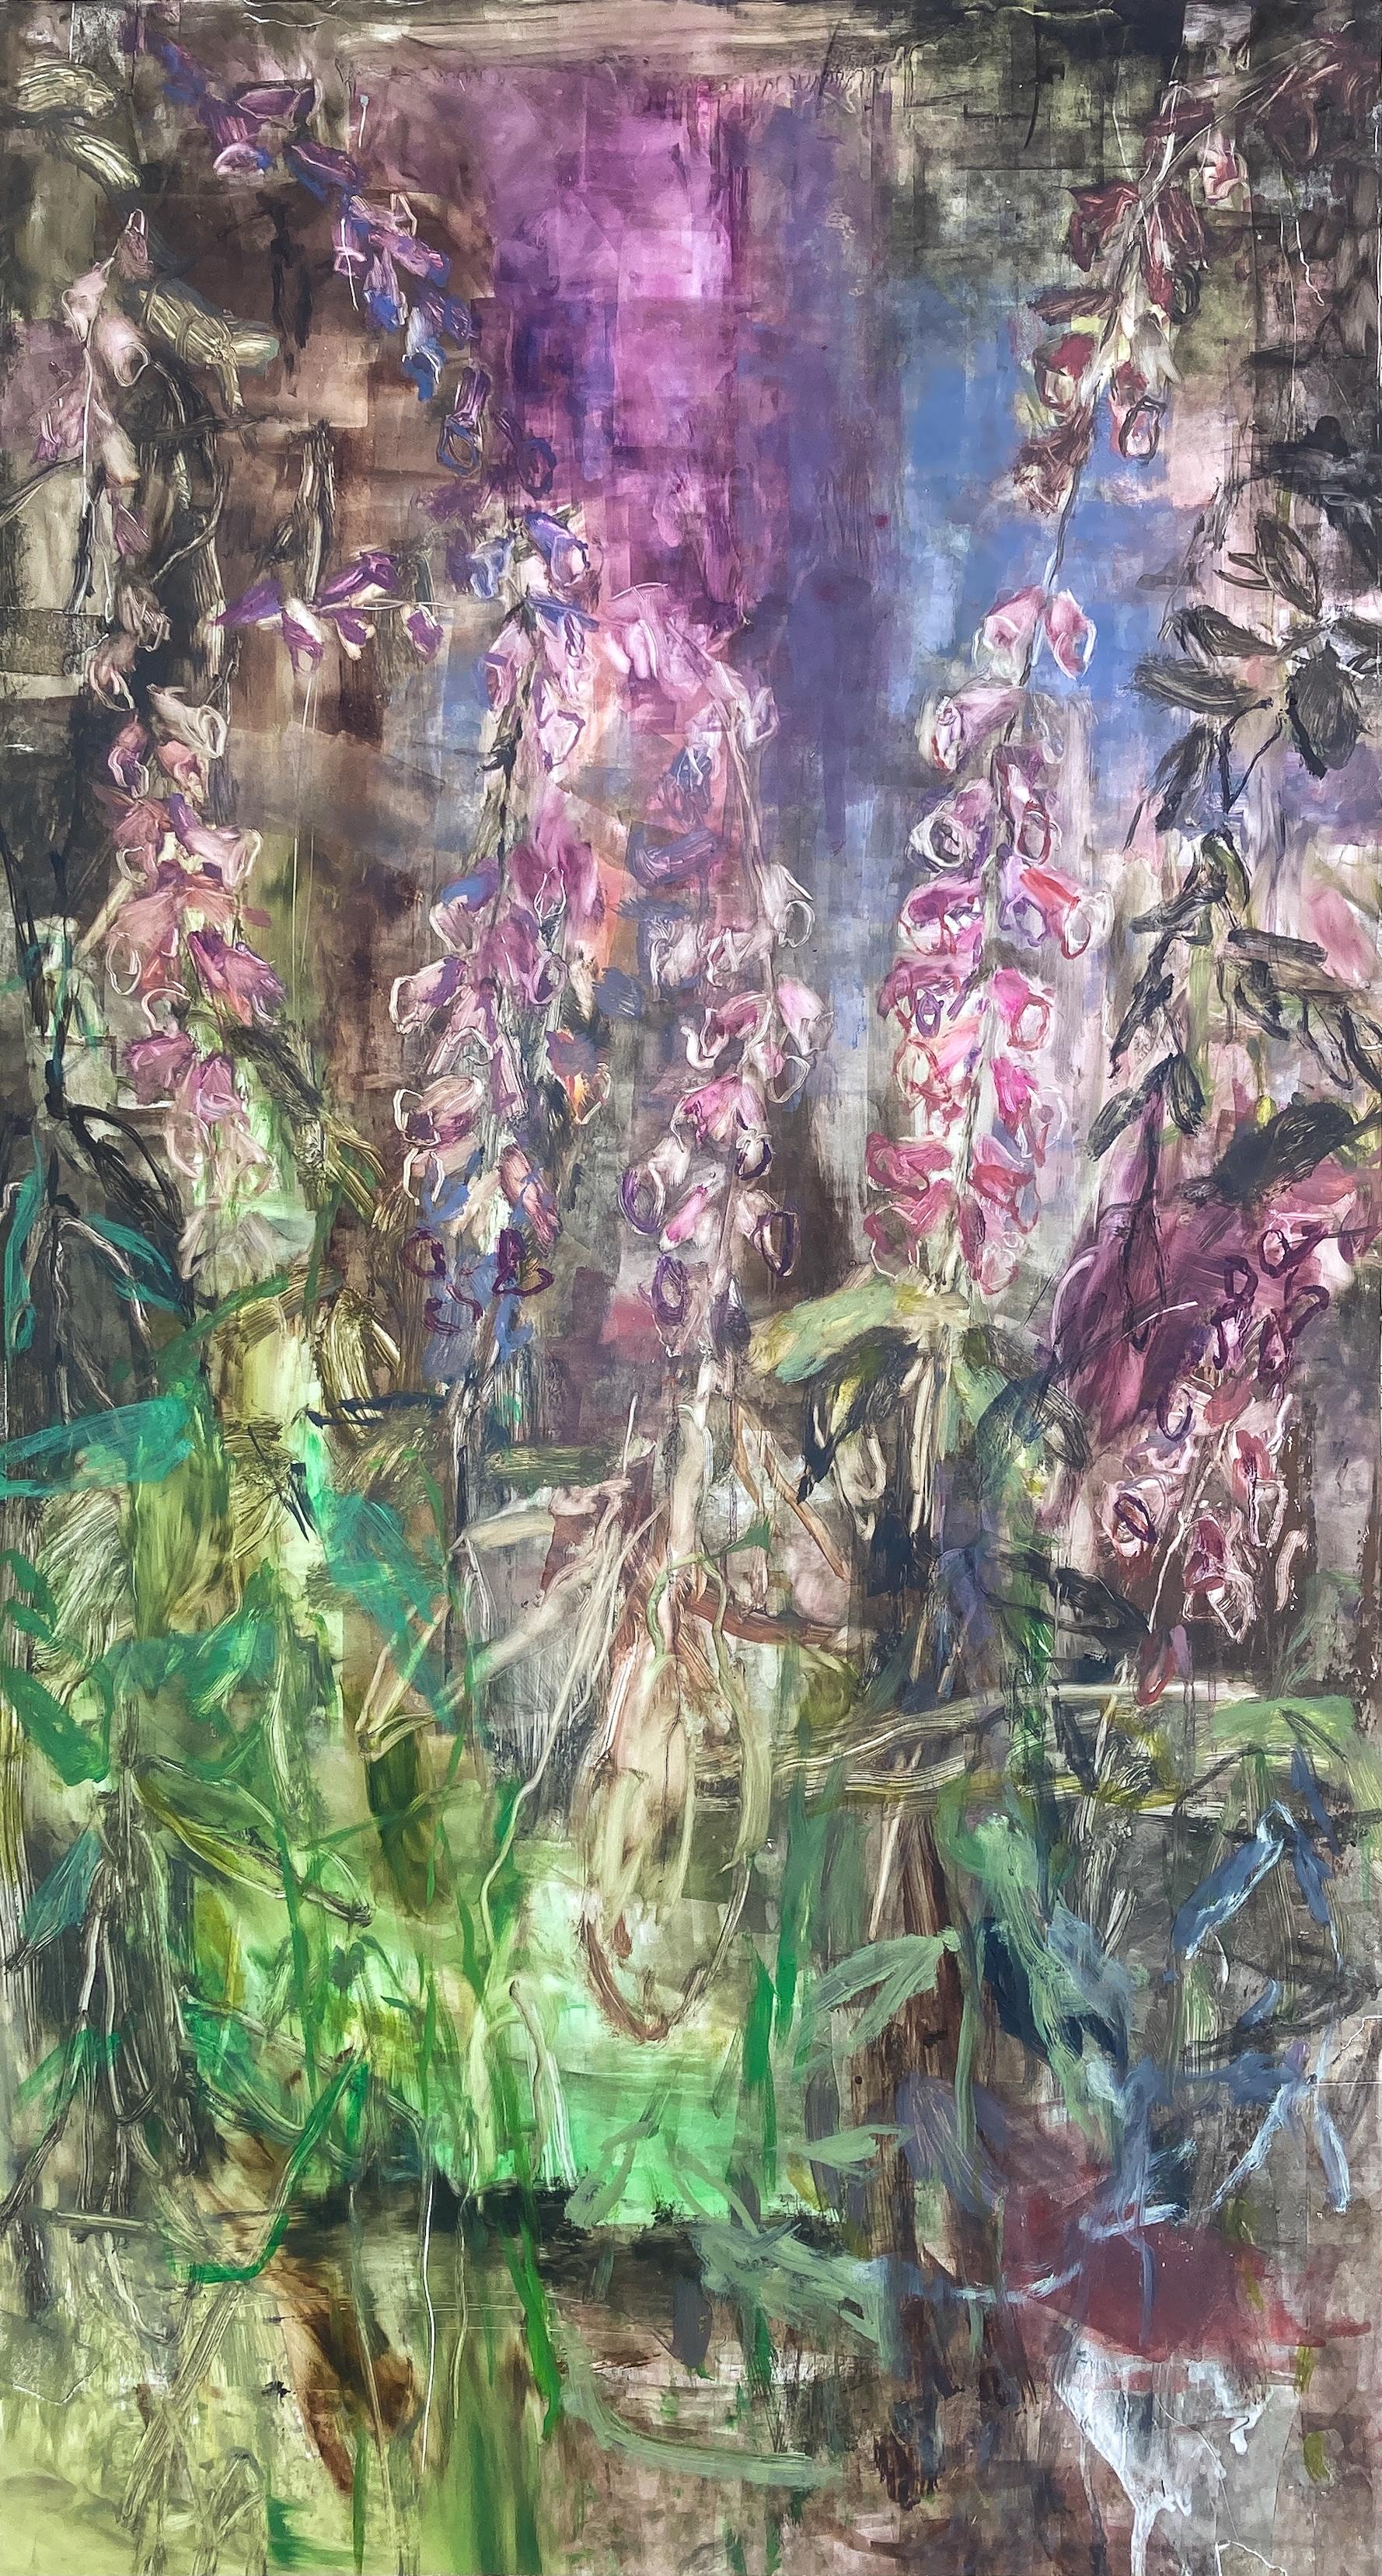 Liza Clement Figurative Painting - FOXGLOVE #2 - Oil on Yupo Panel Painting of Plant Life in the Forest